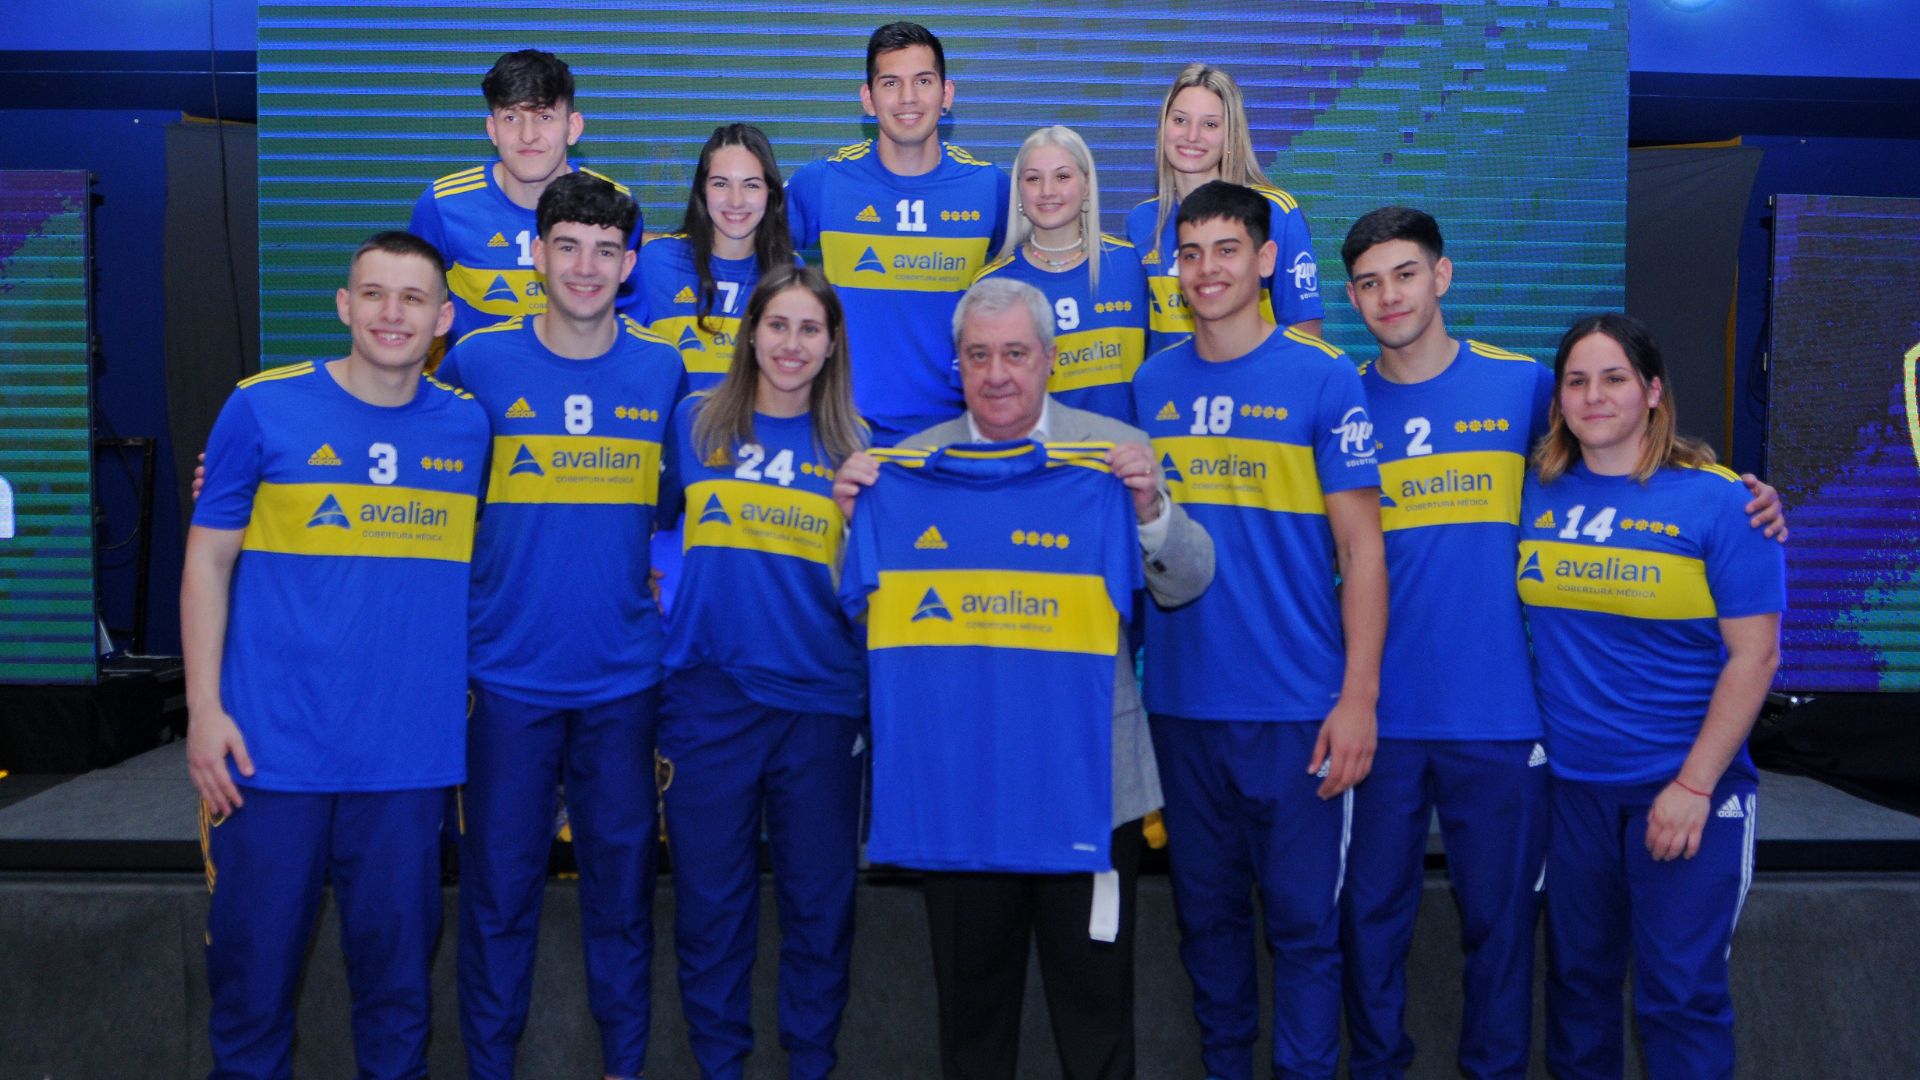 Handball and volleyball players from Boca posed with the president Jorge Amor Ameal with the new jerseys, which bear the Avalian logo on the front (Credit: Avalian Press)